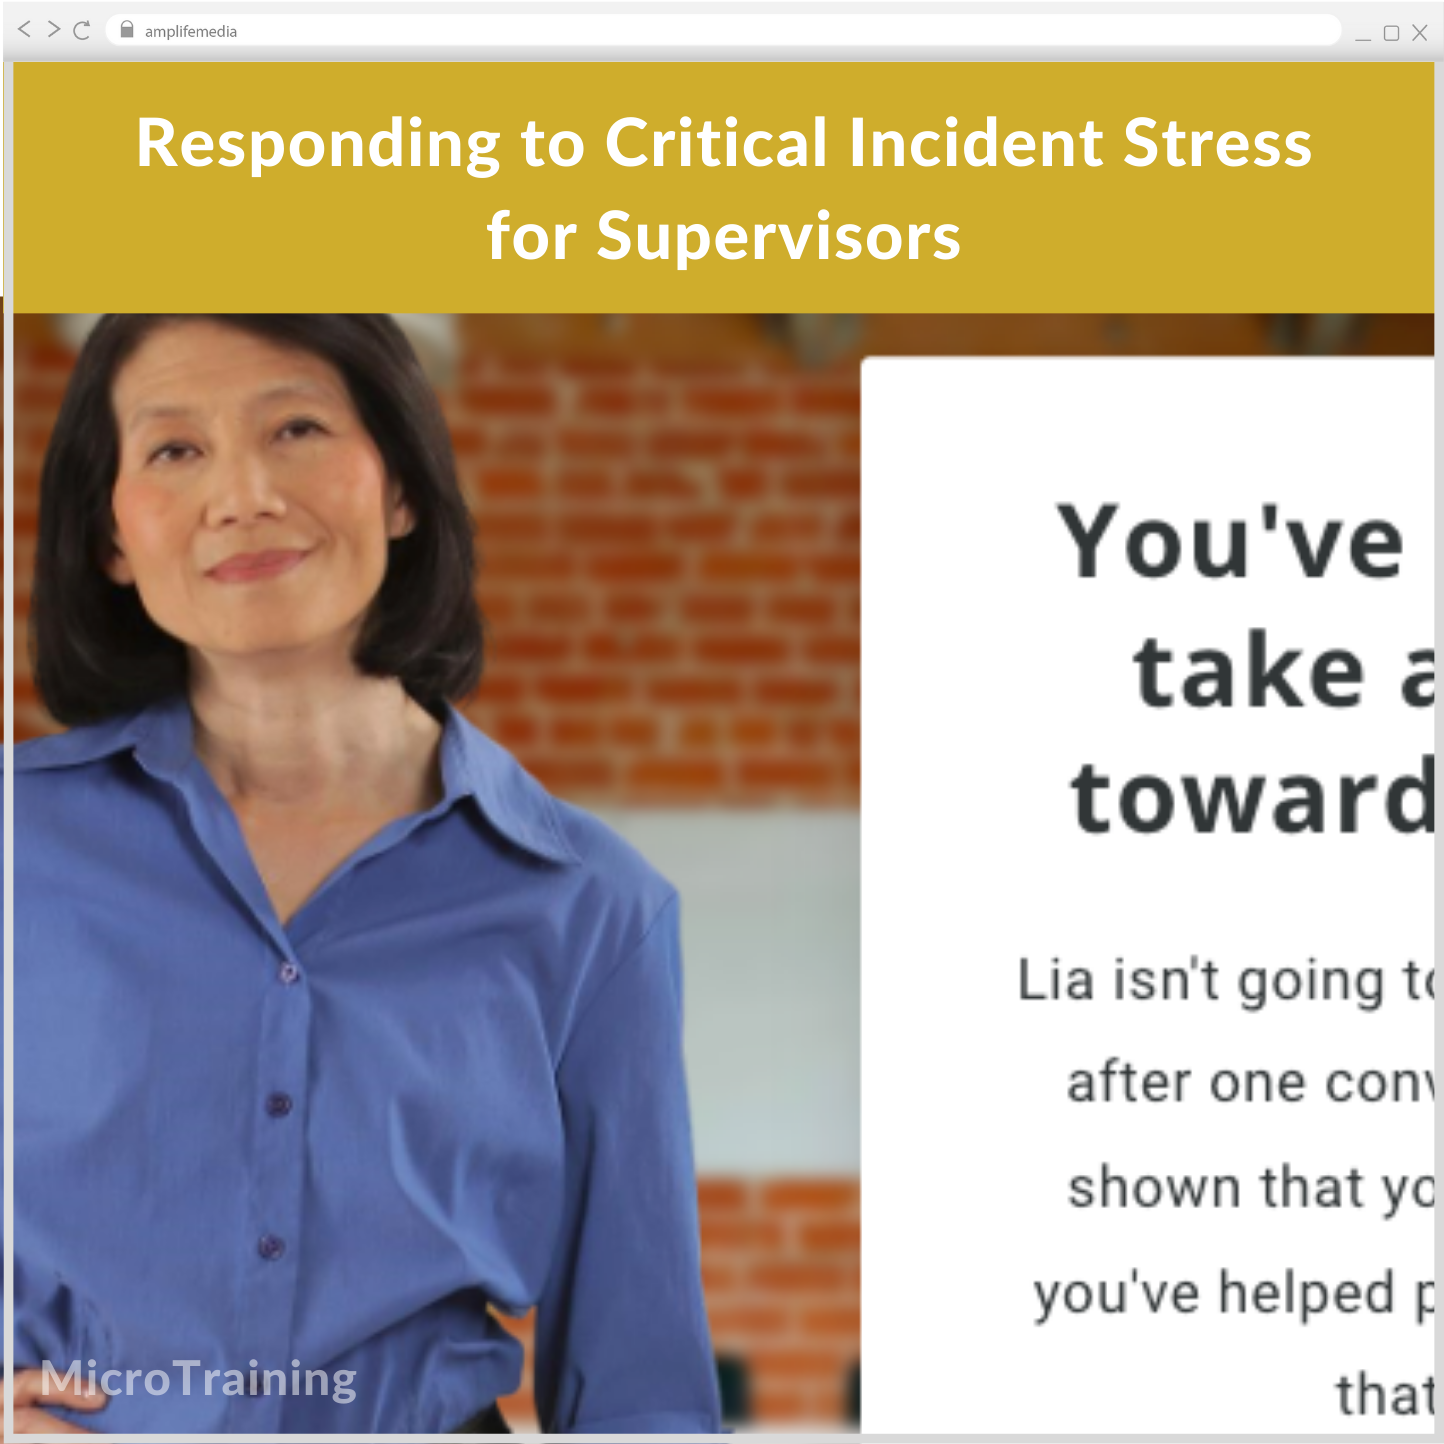 Subscription to Wellbeing Media: Responding to Critical Incidents - For Supervisors MT 722